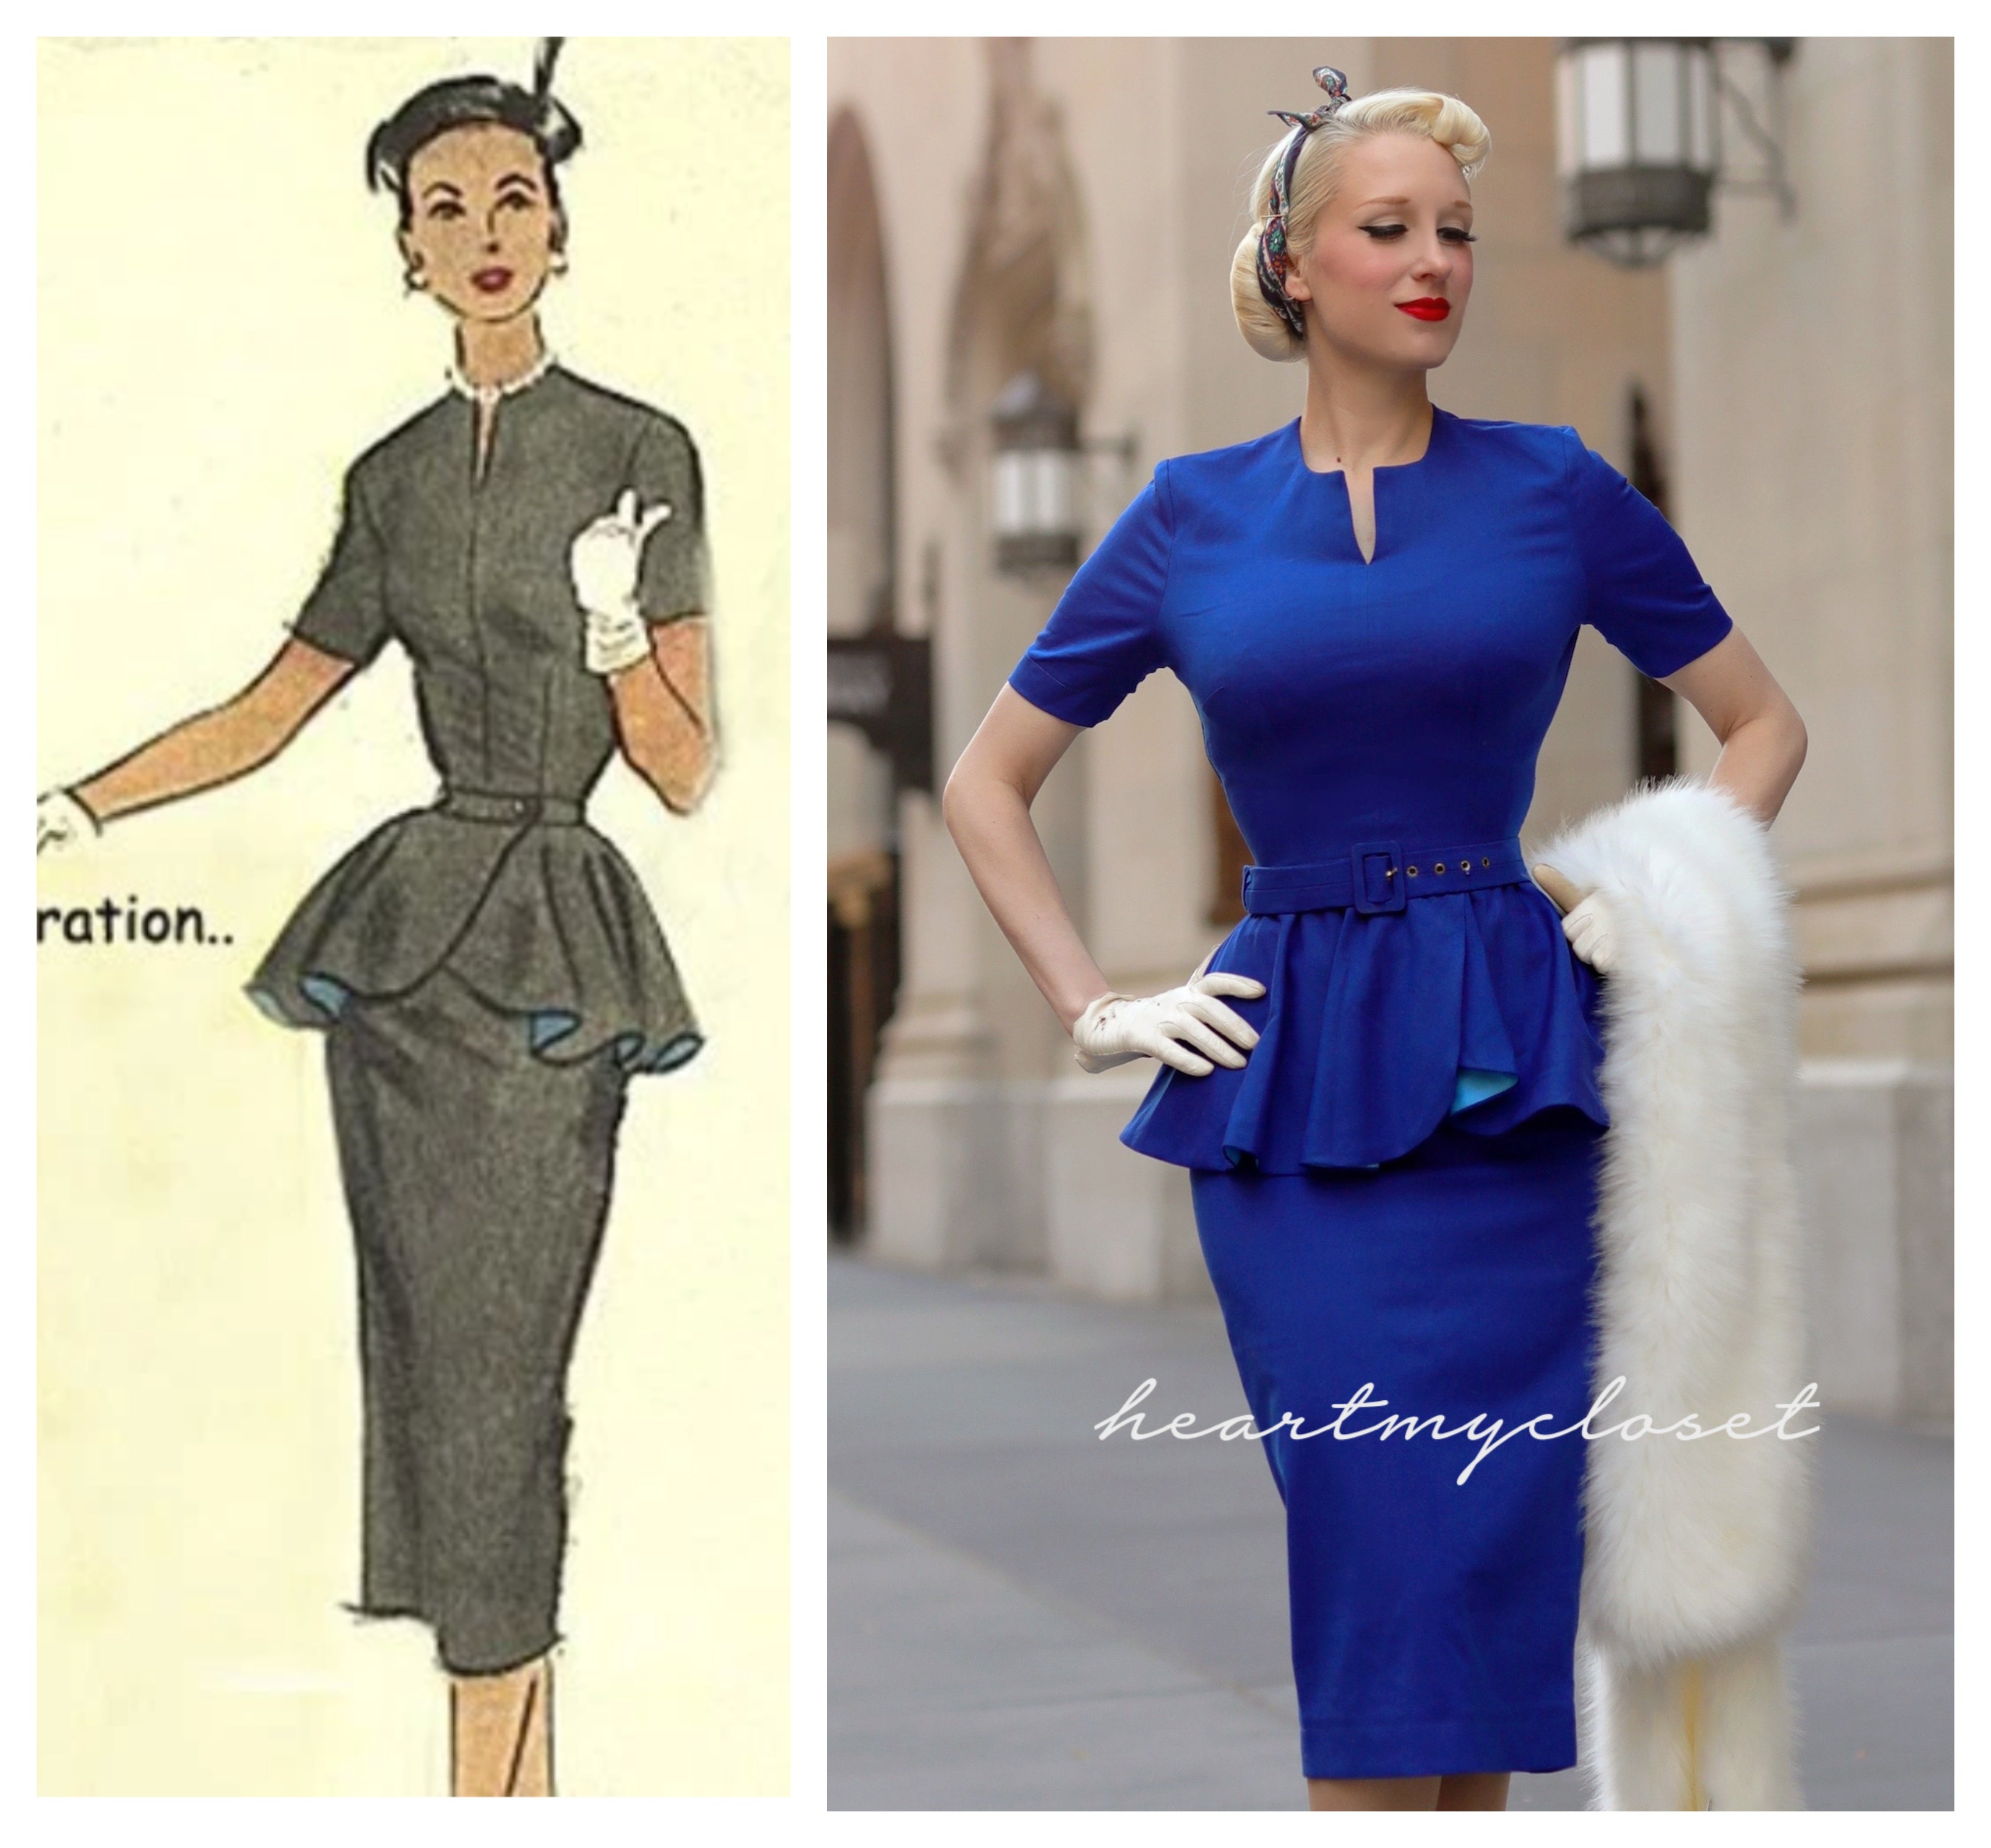 1930s Fashion  What Did Women Wear in the 1930s? 30s Fashion Guide